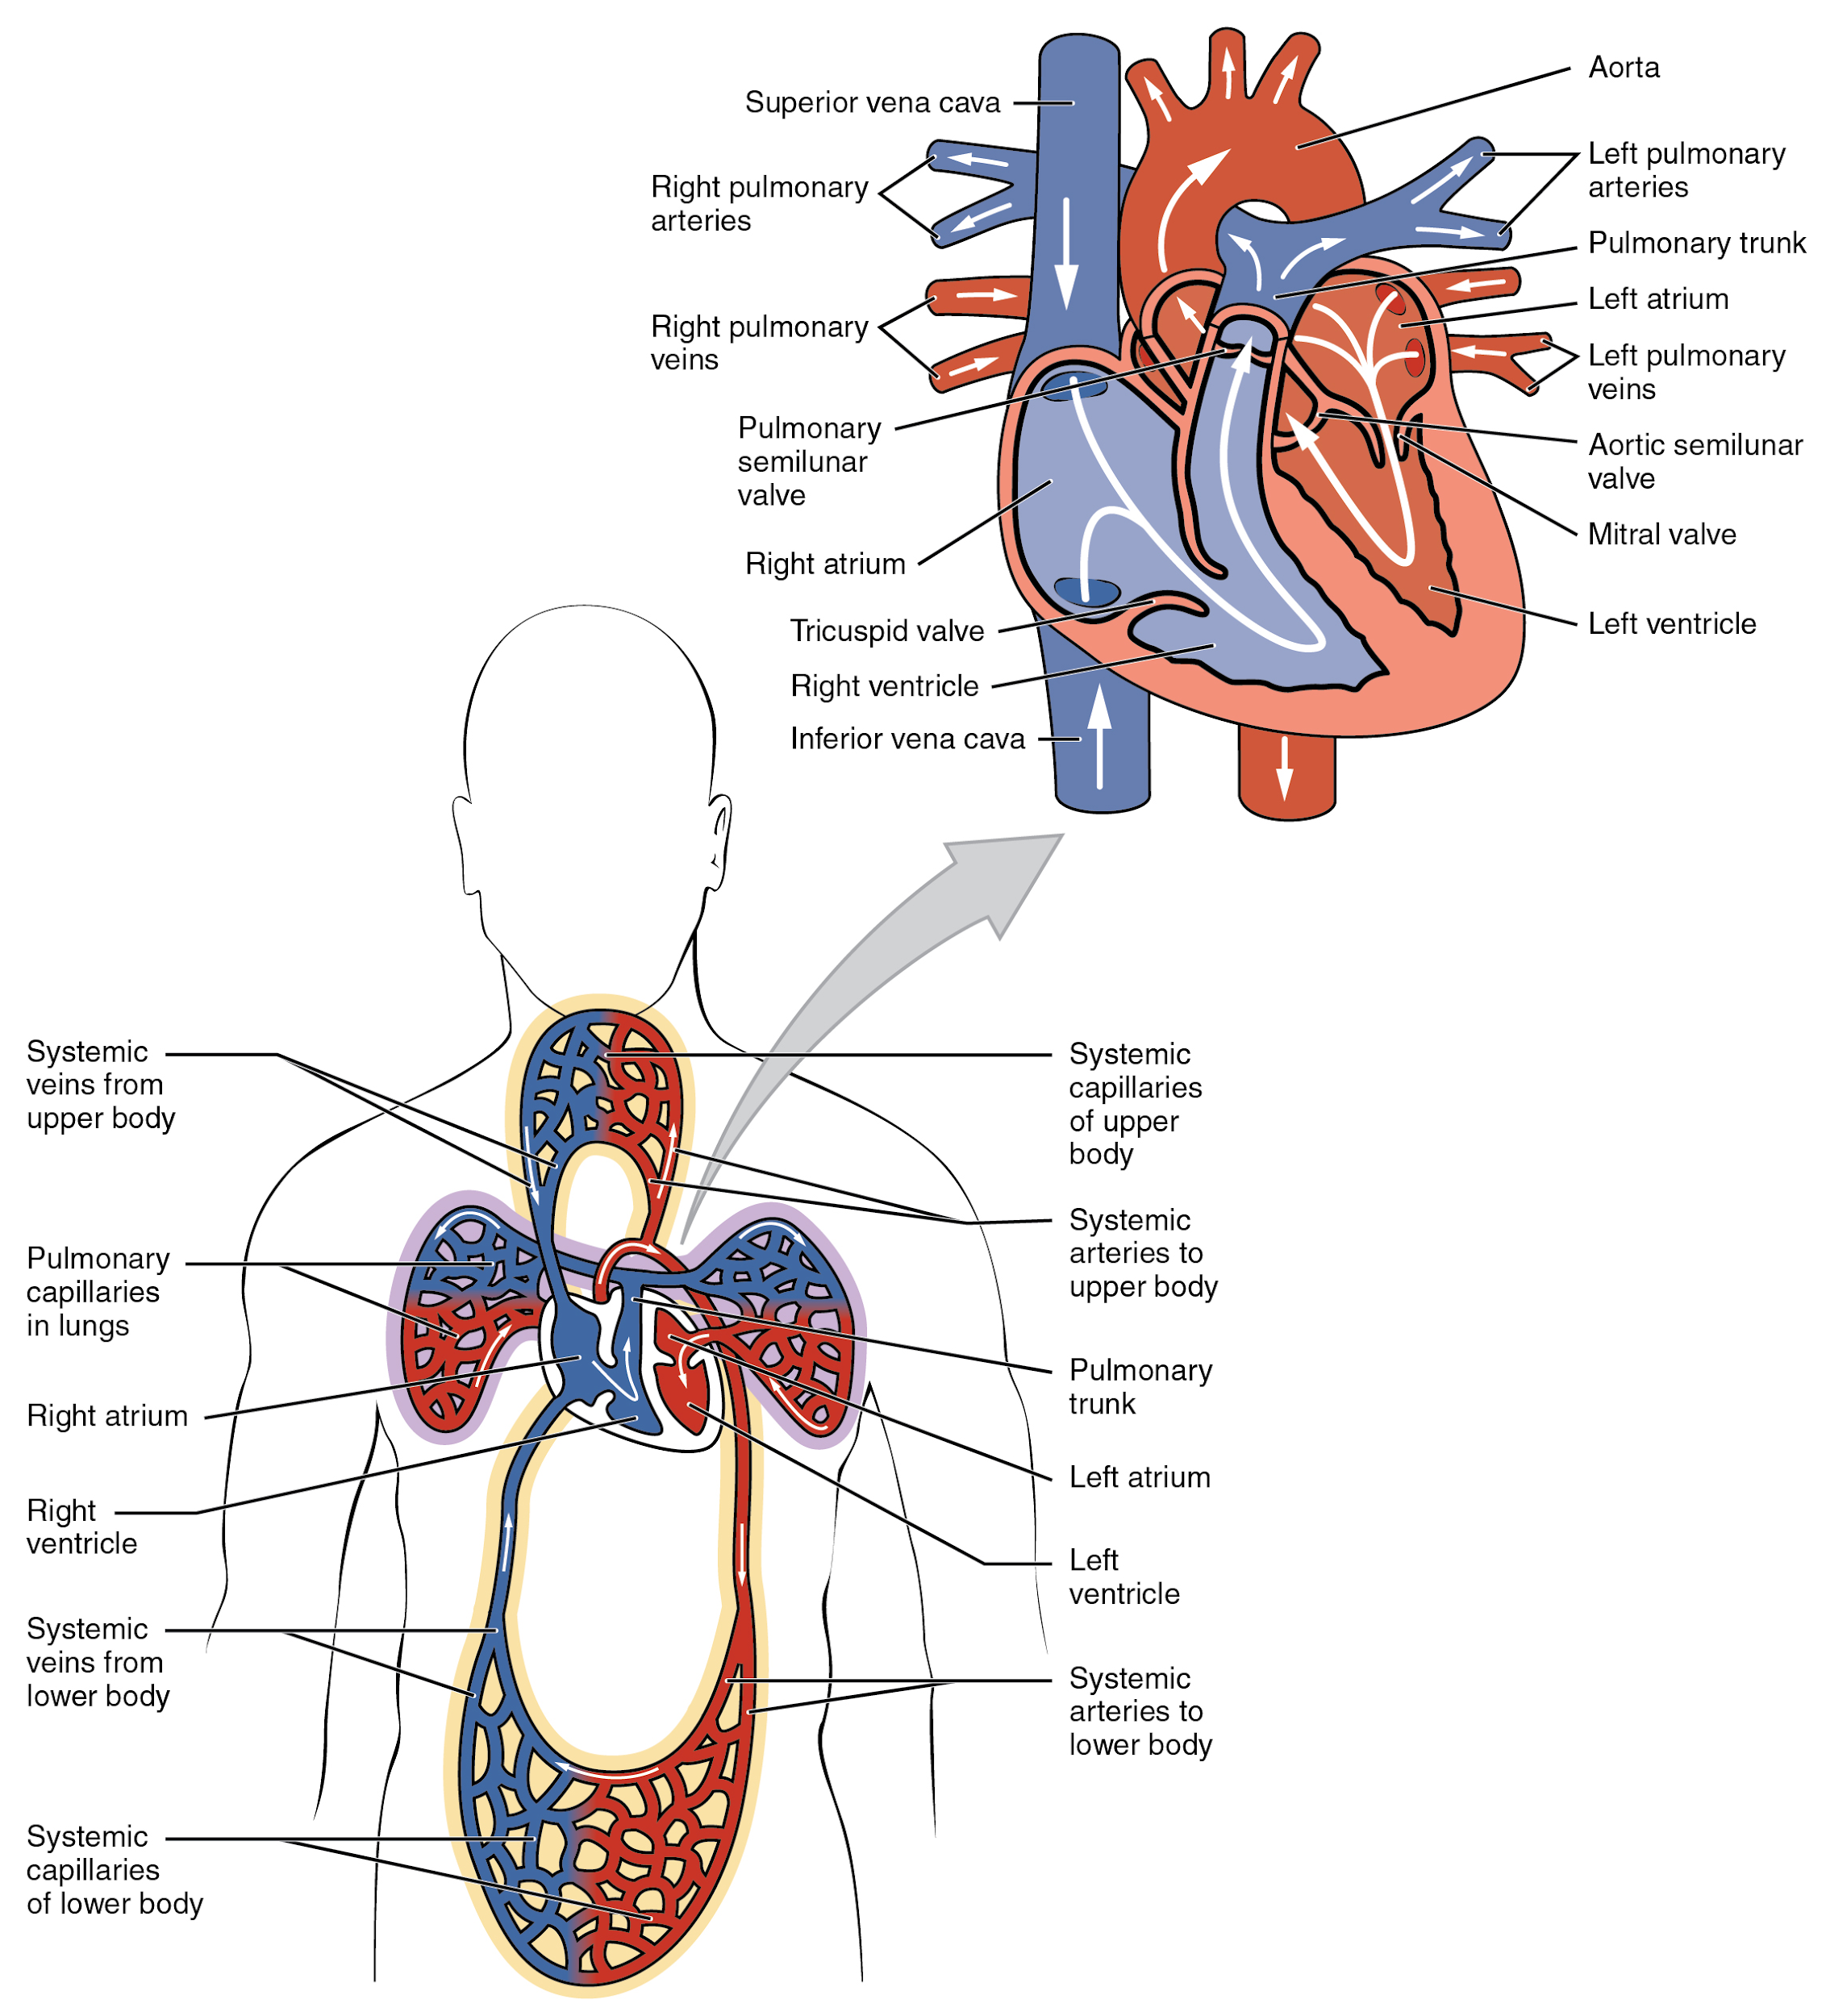 Illustration, with labels showing chambers of heart and blood circulation.